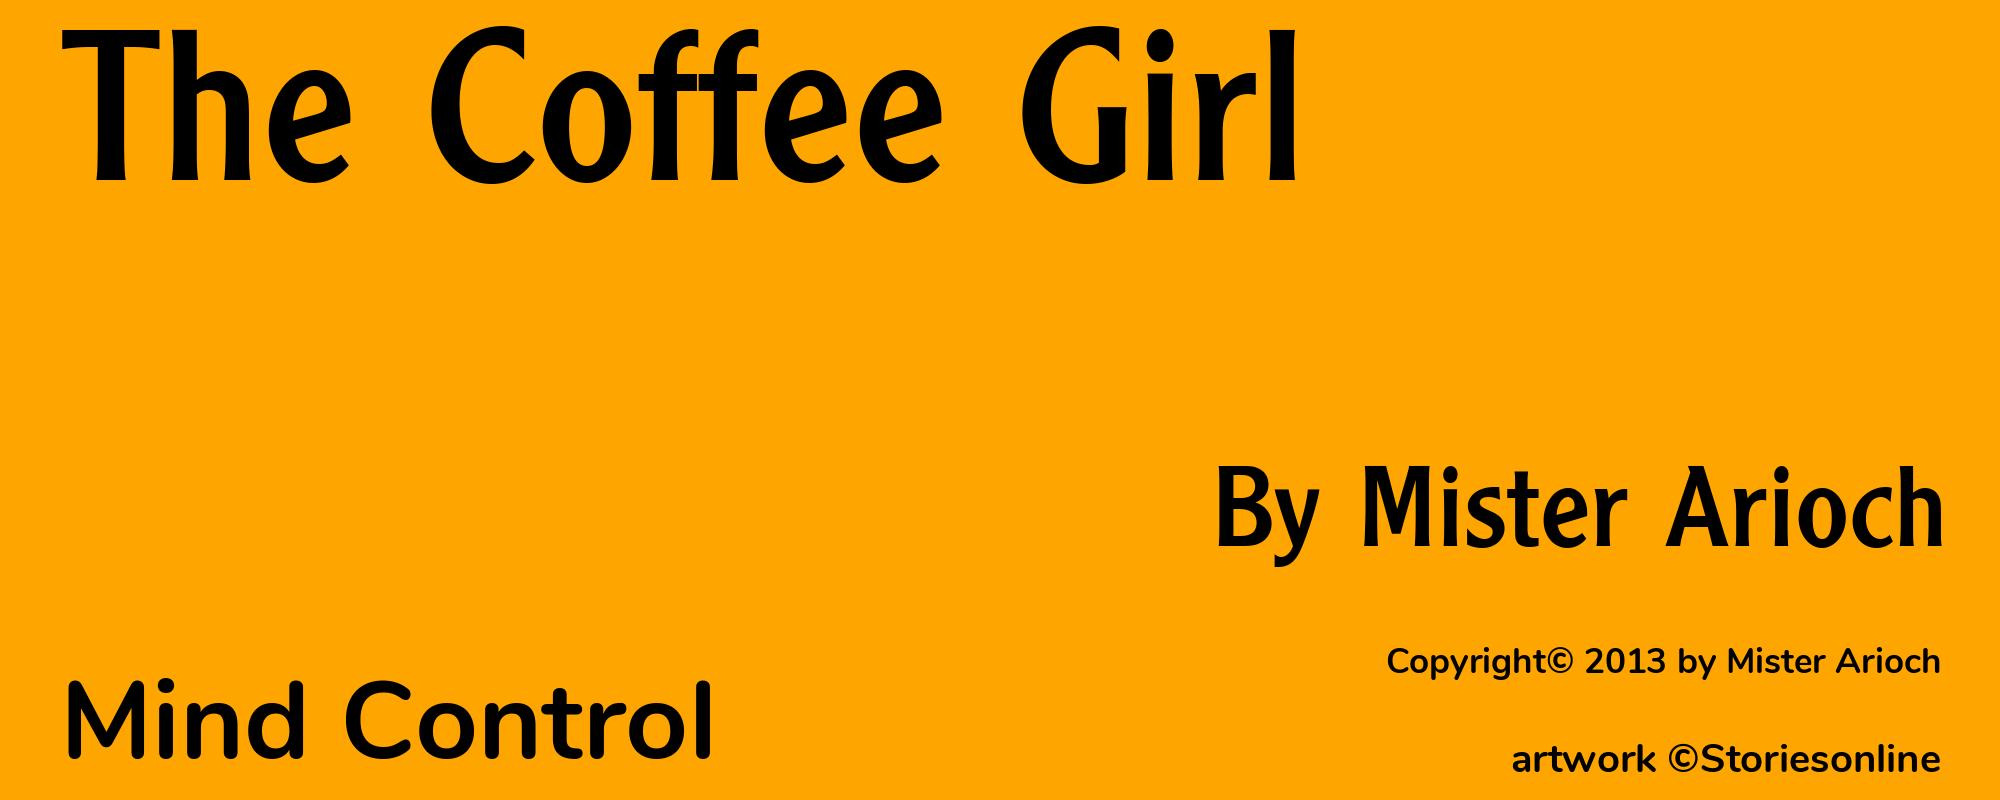 The Coffee Girl - Cover